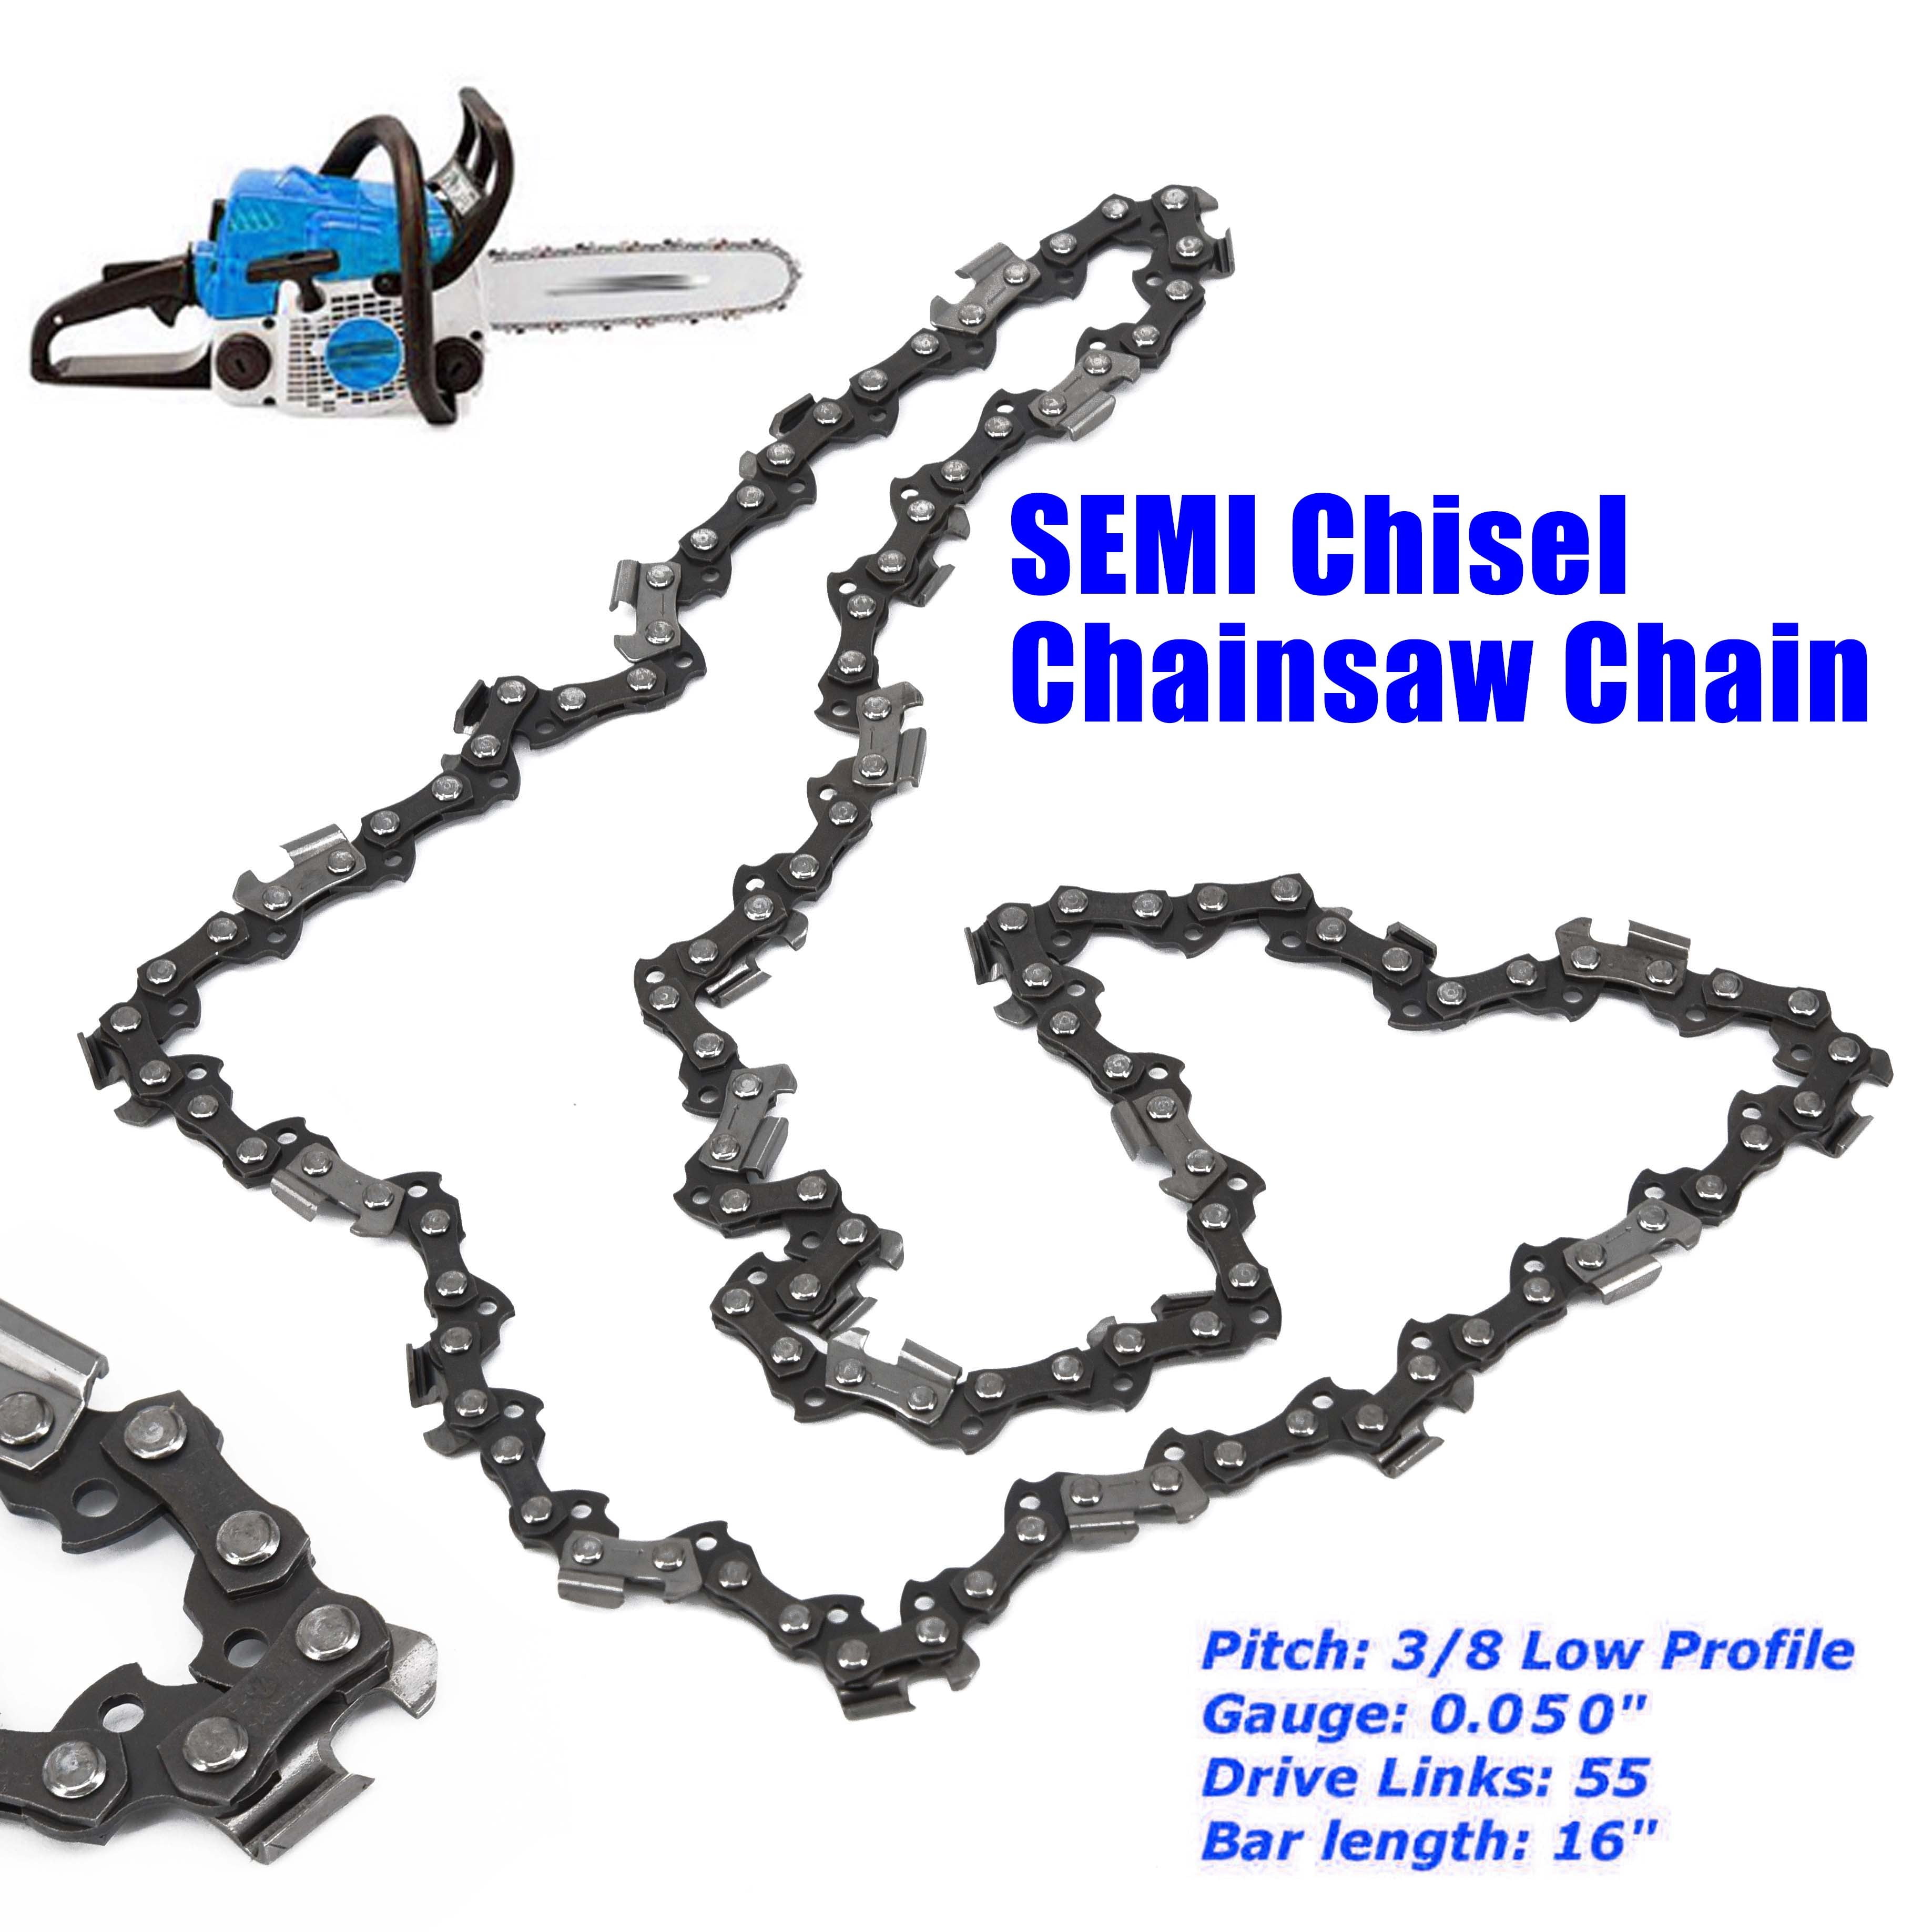 Genuine Stihl Chainsaw Chain For 14" 35cm Bar 3/8" PS 50 3617 000 0050 Tracked 